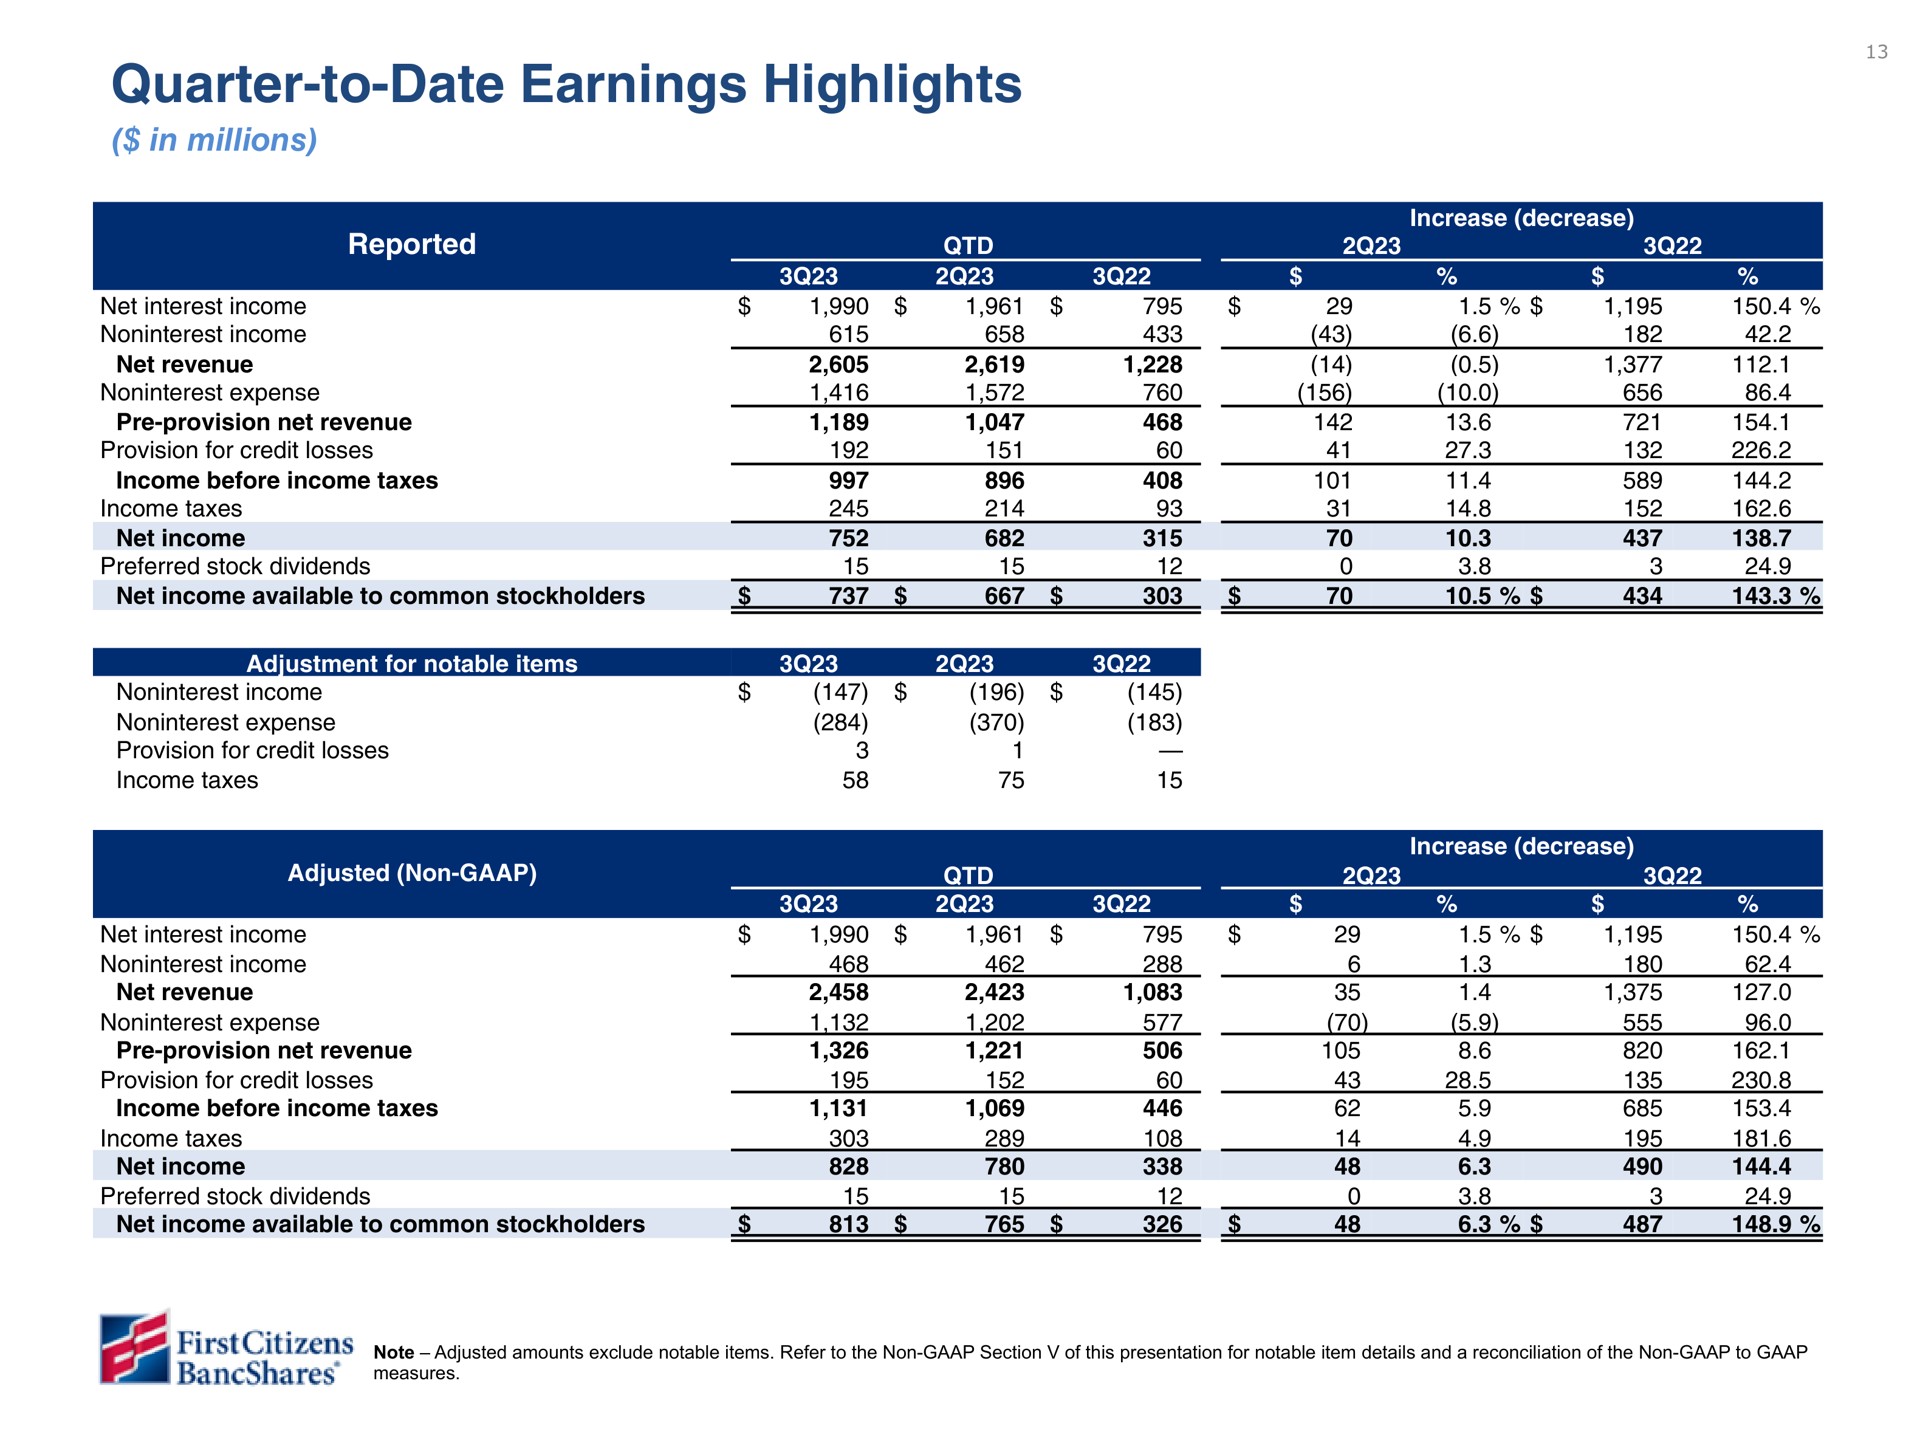 quarter to date earnings highlights | First Citizens BancShares